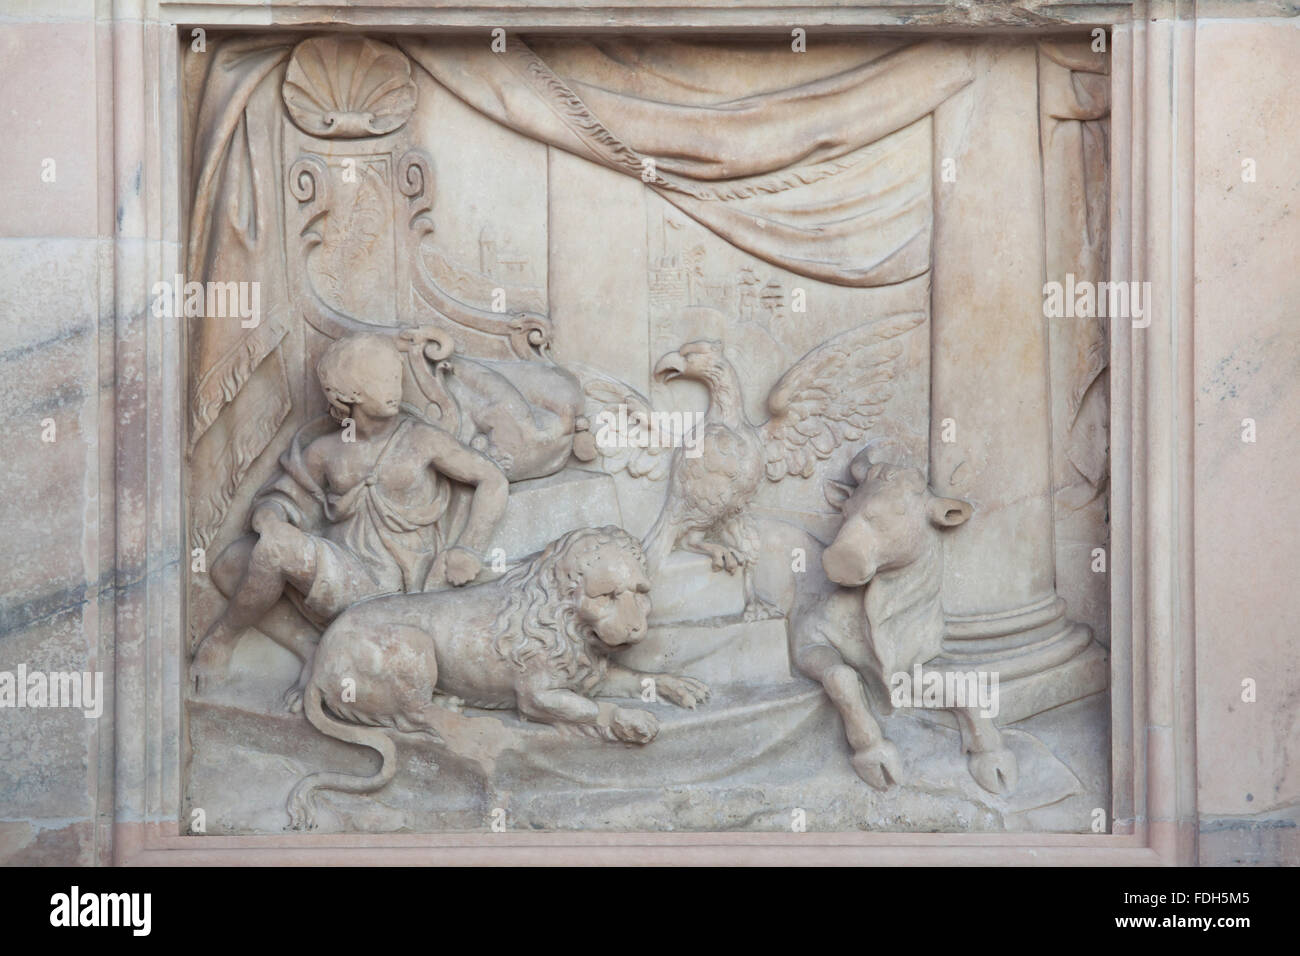 Throne of God and Four Living Creatures. Marble relief on the main facade of the Milan Cathedral (Duomo di Milano) in Milan, Lom Stock Photo